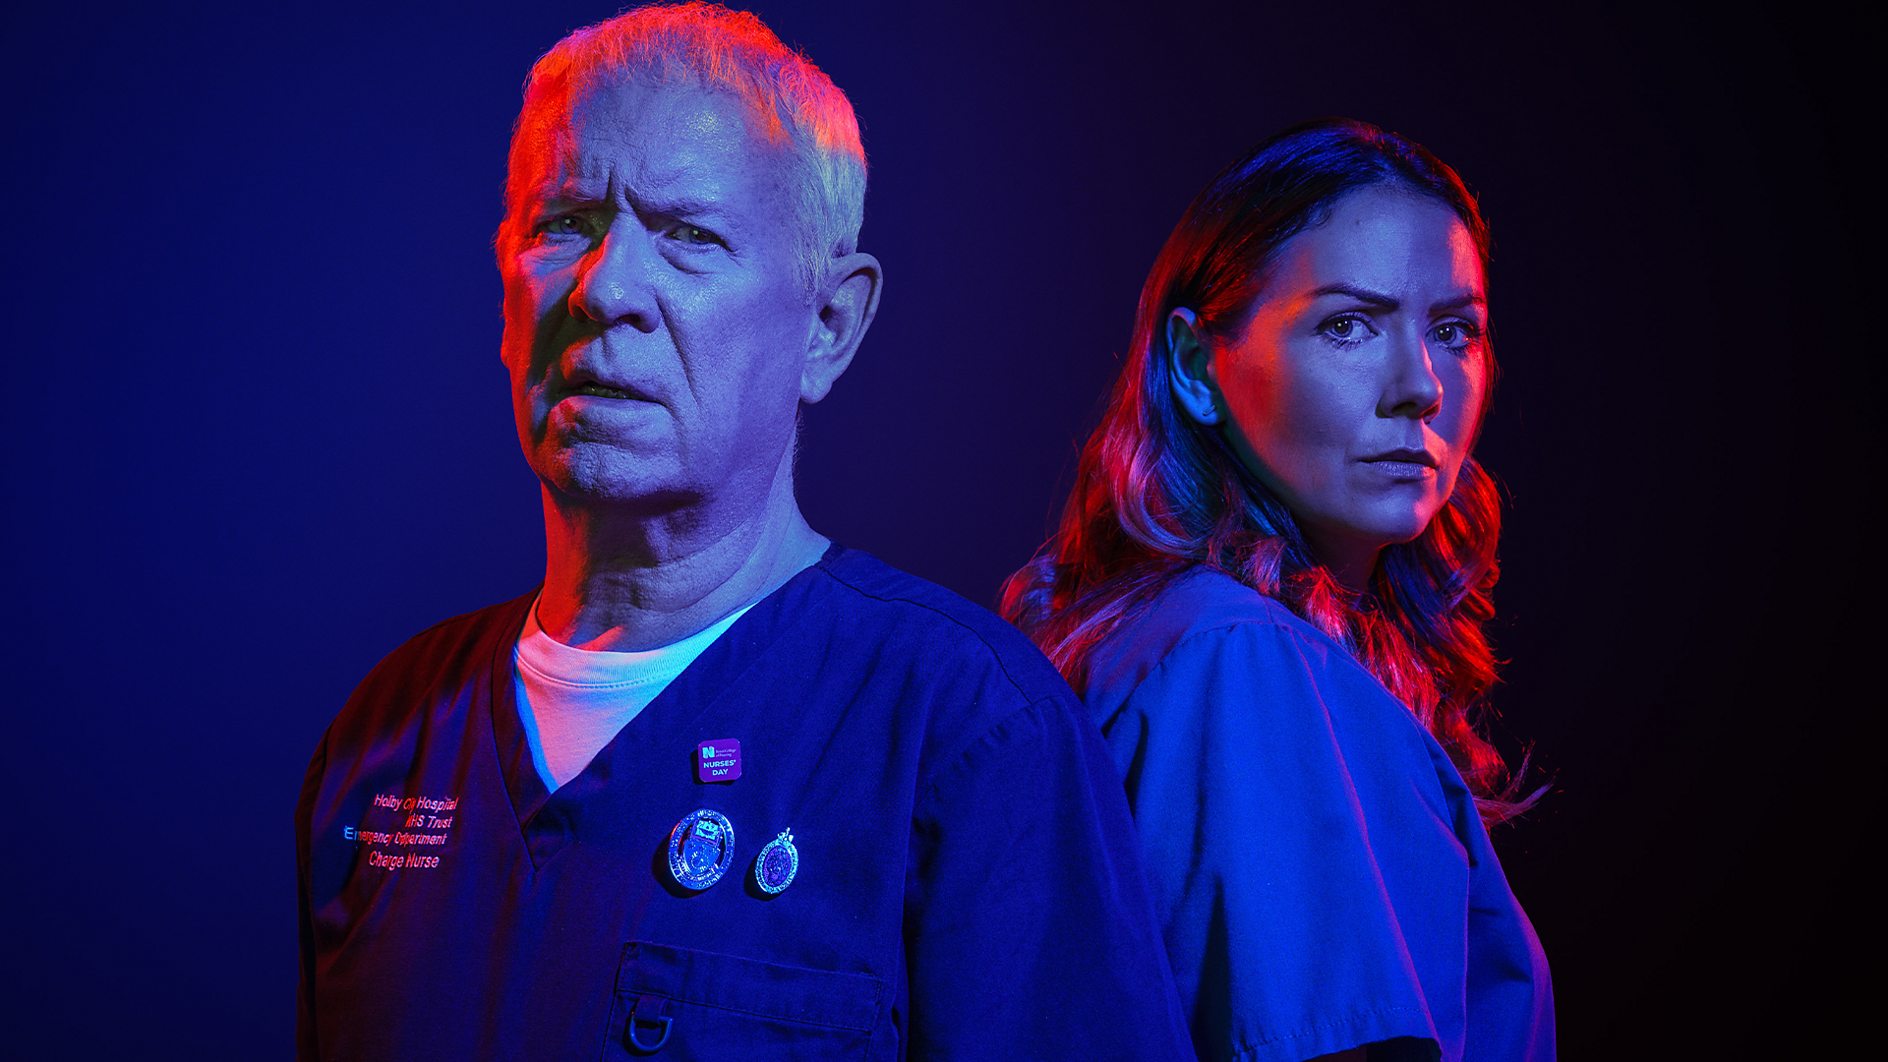 Award winning series Casualty will return to BBC One and BBC iPlayer on Saturday 30 December